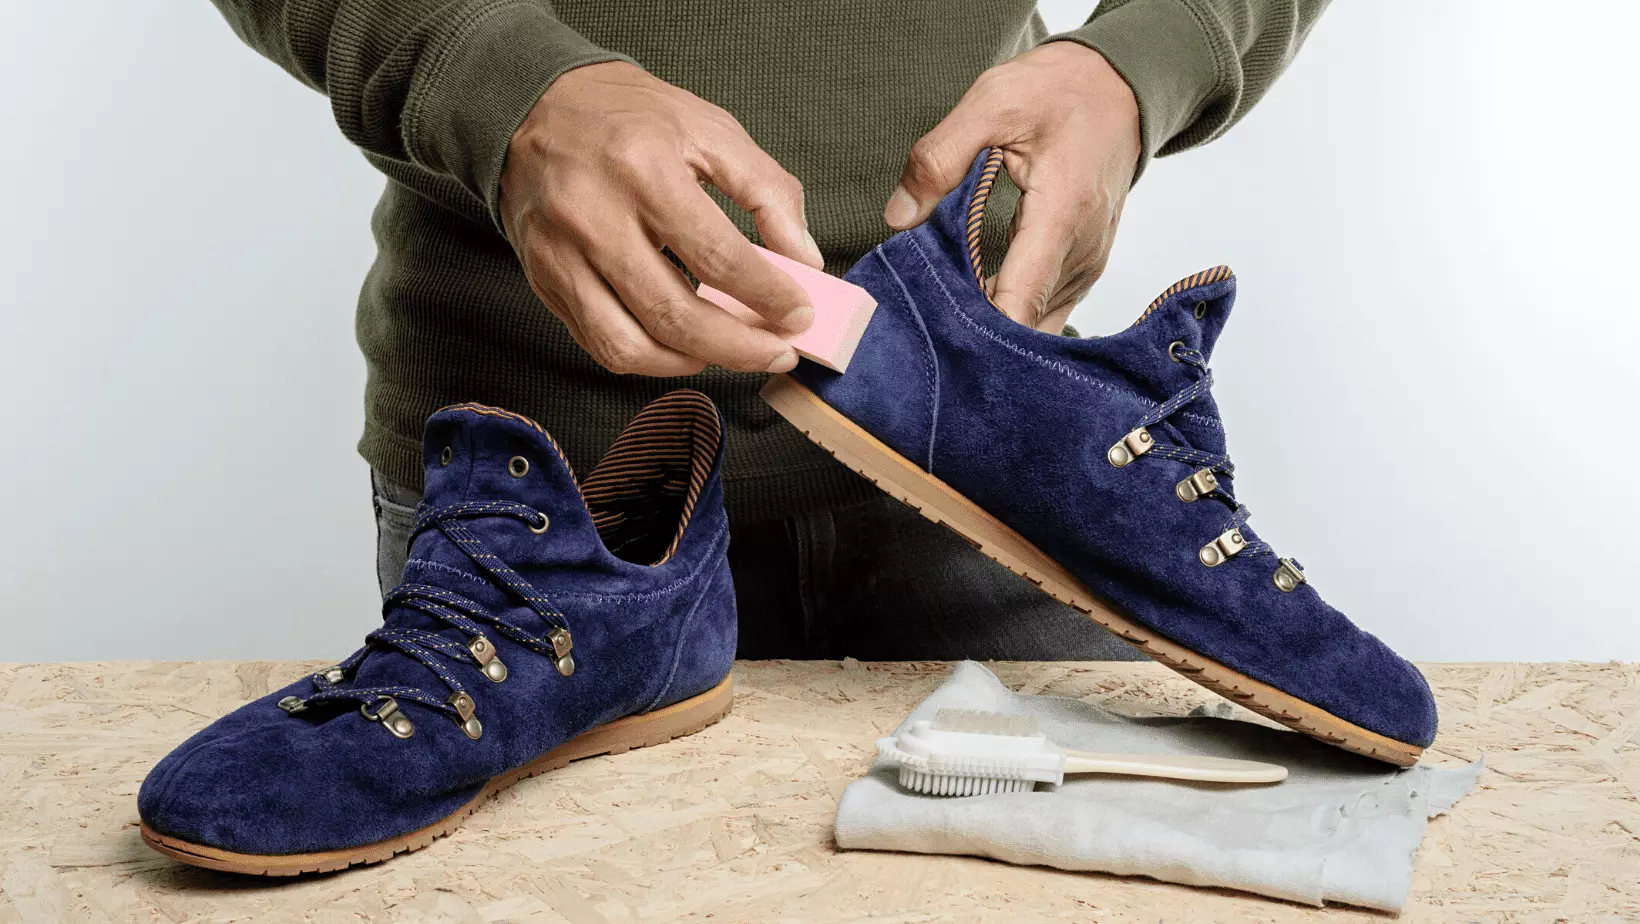 How to clean running shoes at home (5 easy steps)